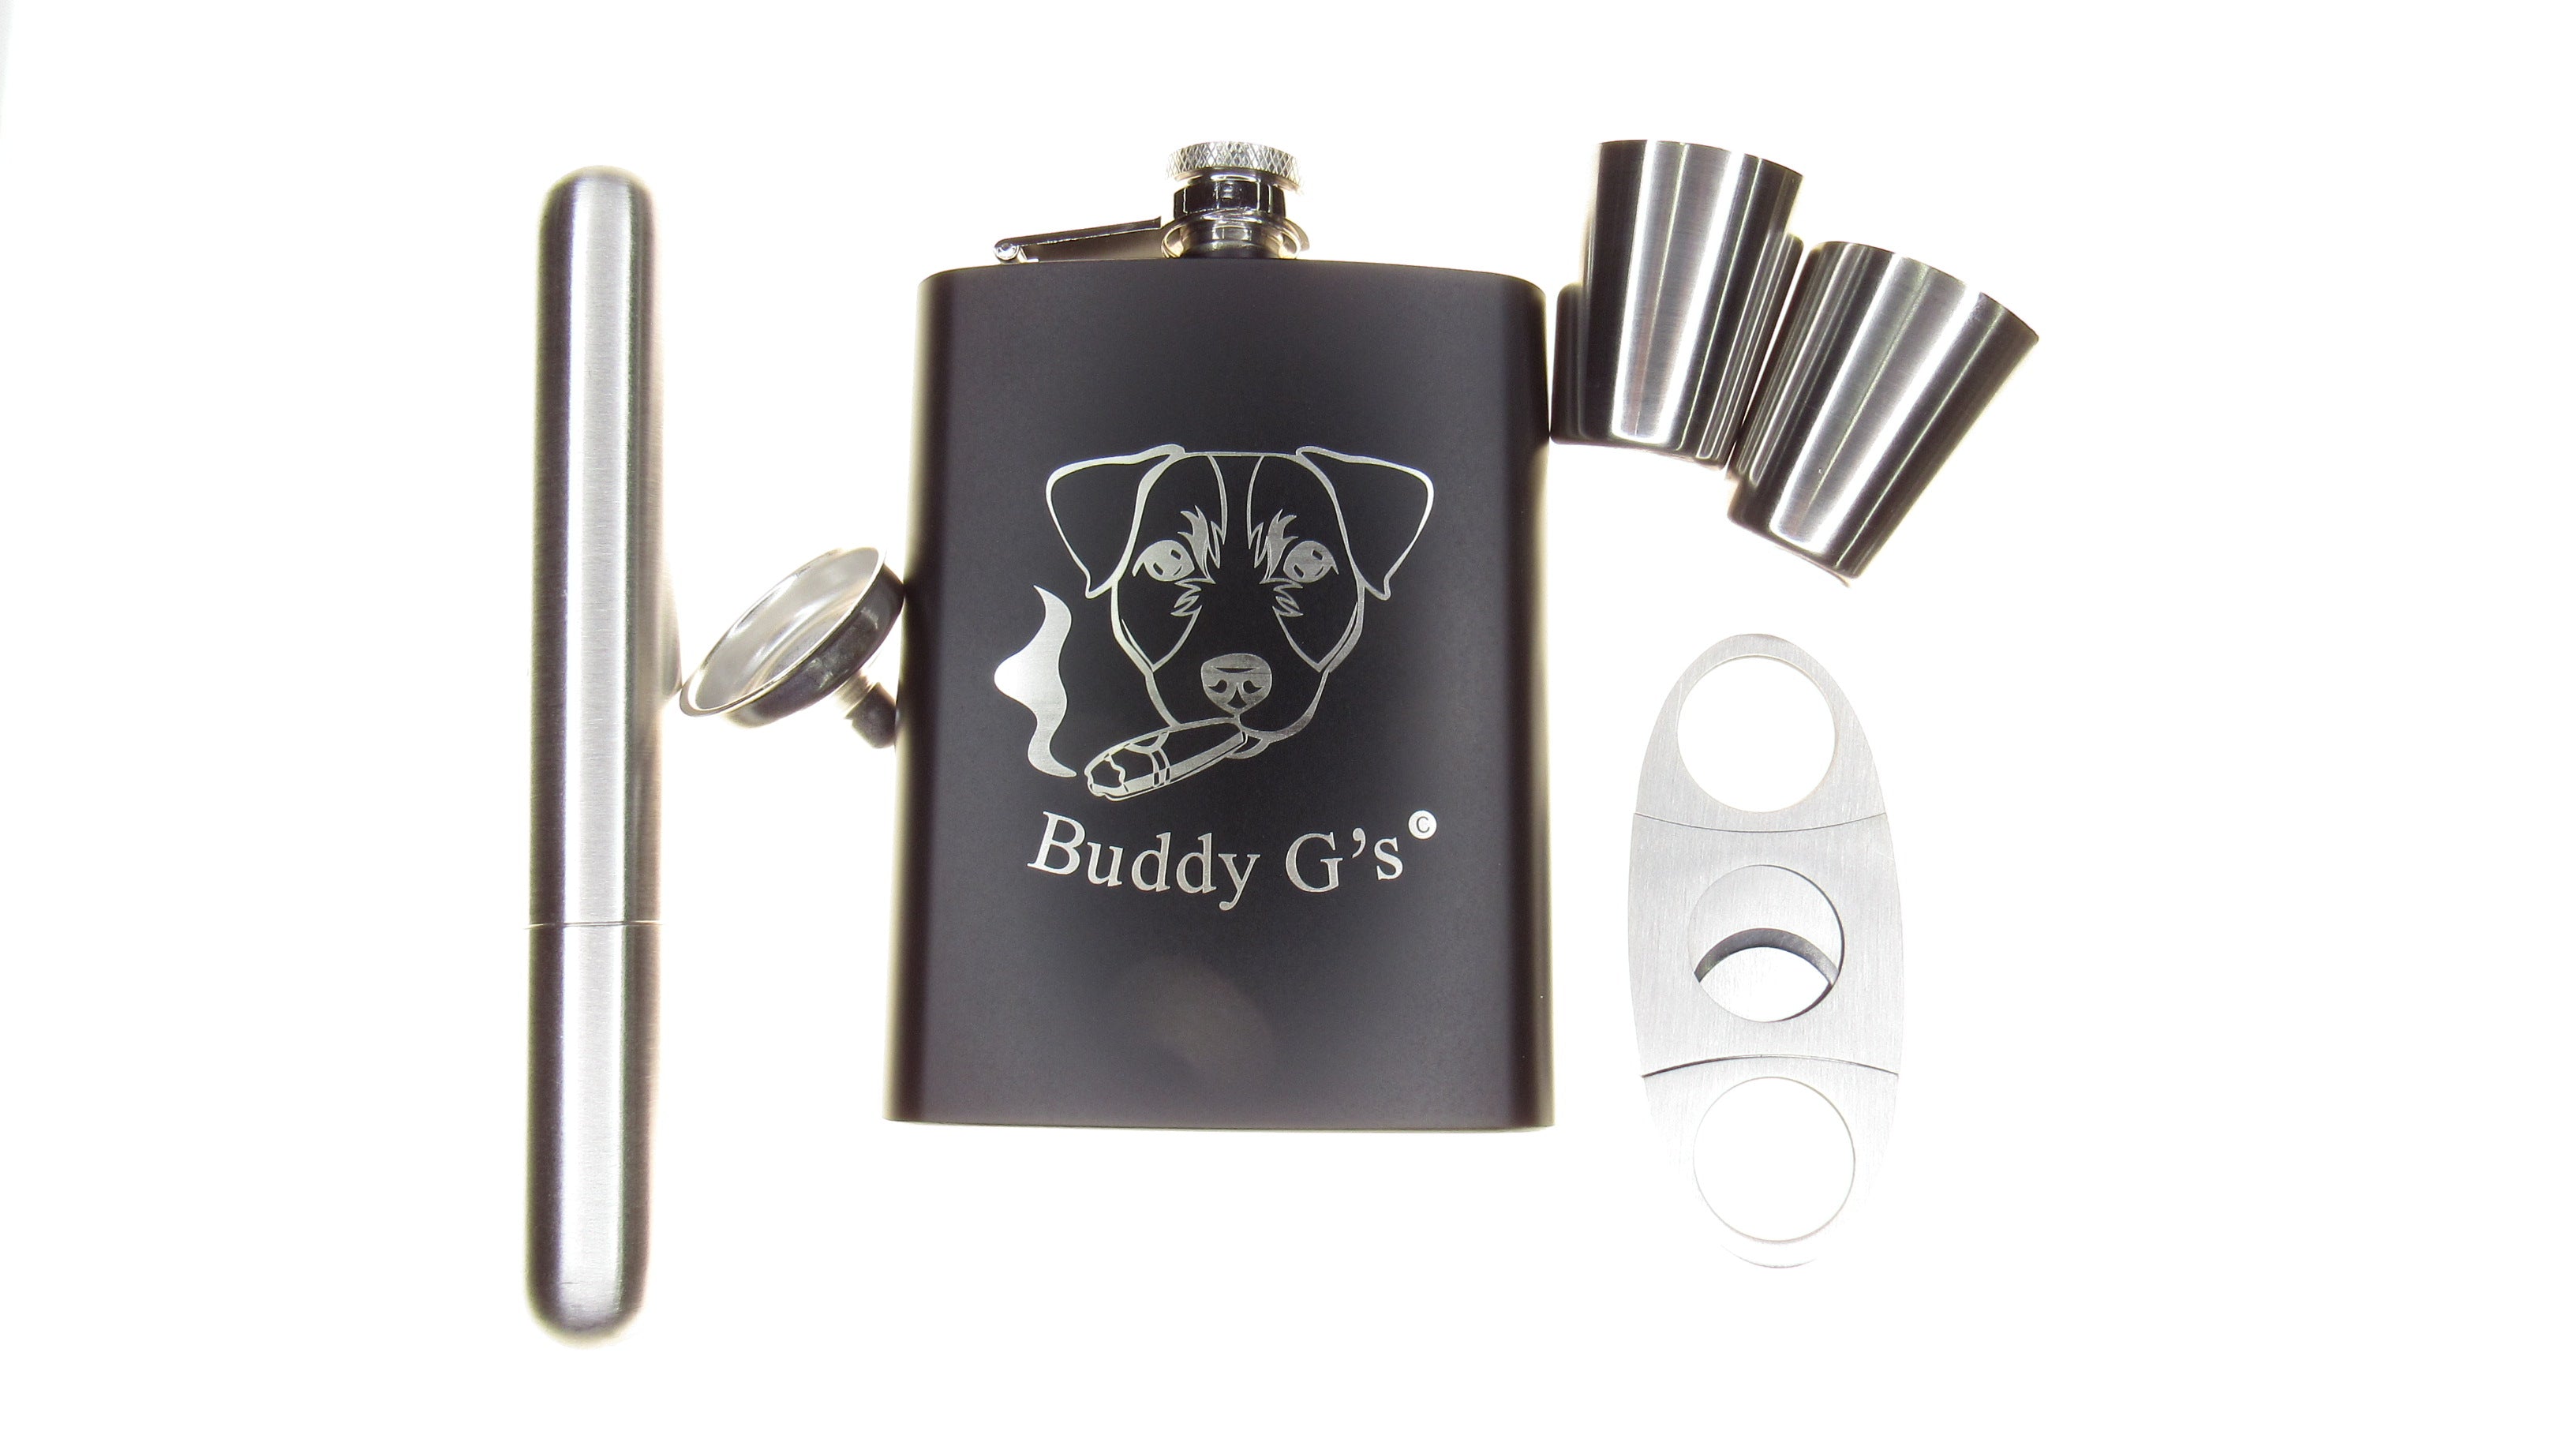 Whisky Hip Flask Set - 8 oz. Stainless Steel Flask Finished in Rich Matte Black 6 Piece Buddy G's Flask Gift Boxed Set with a Cigar Cutter, Cigar Tube, 2 Shots and a Funnel